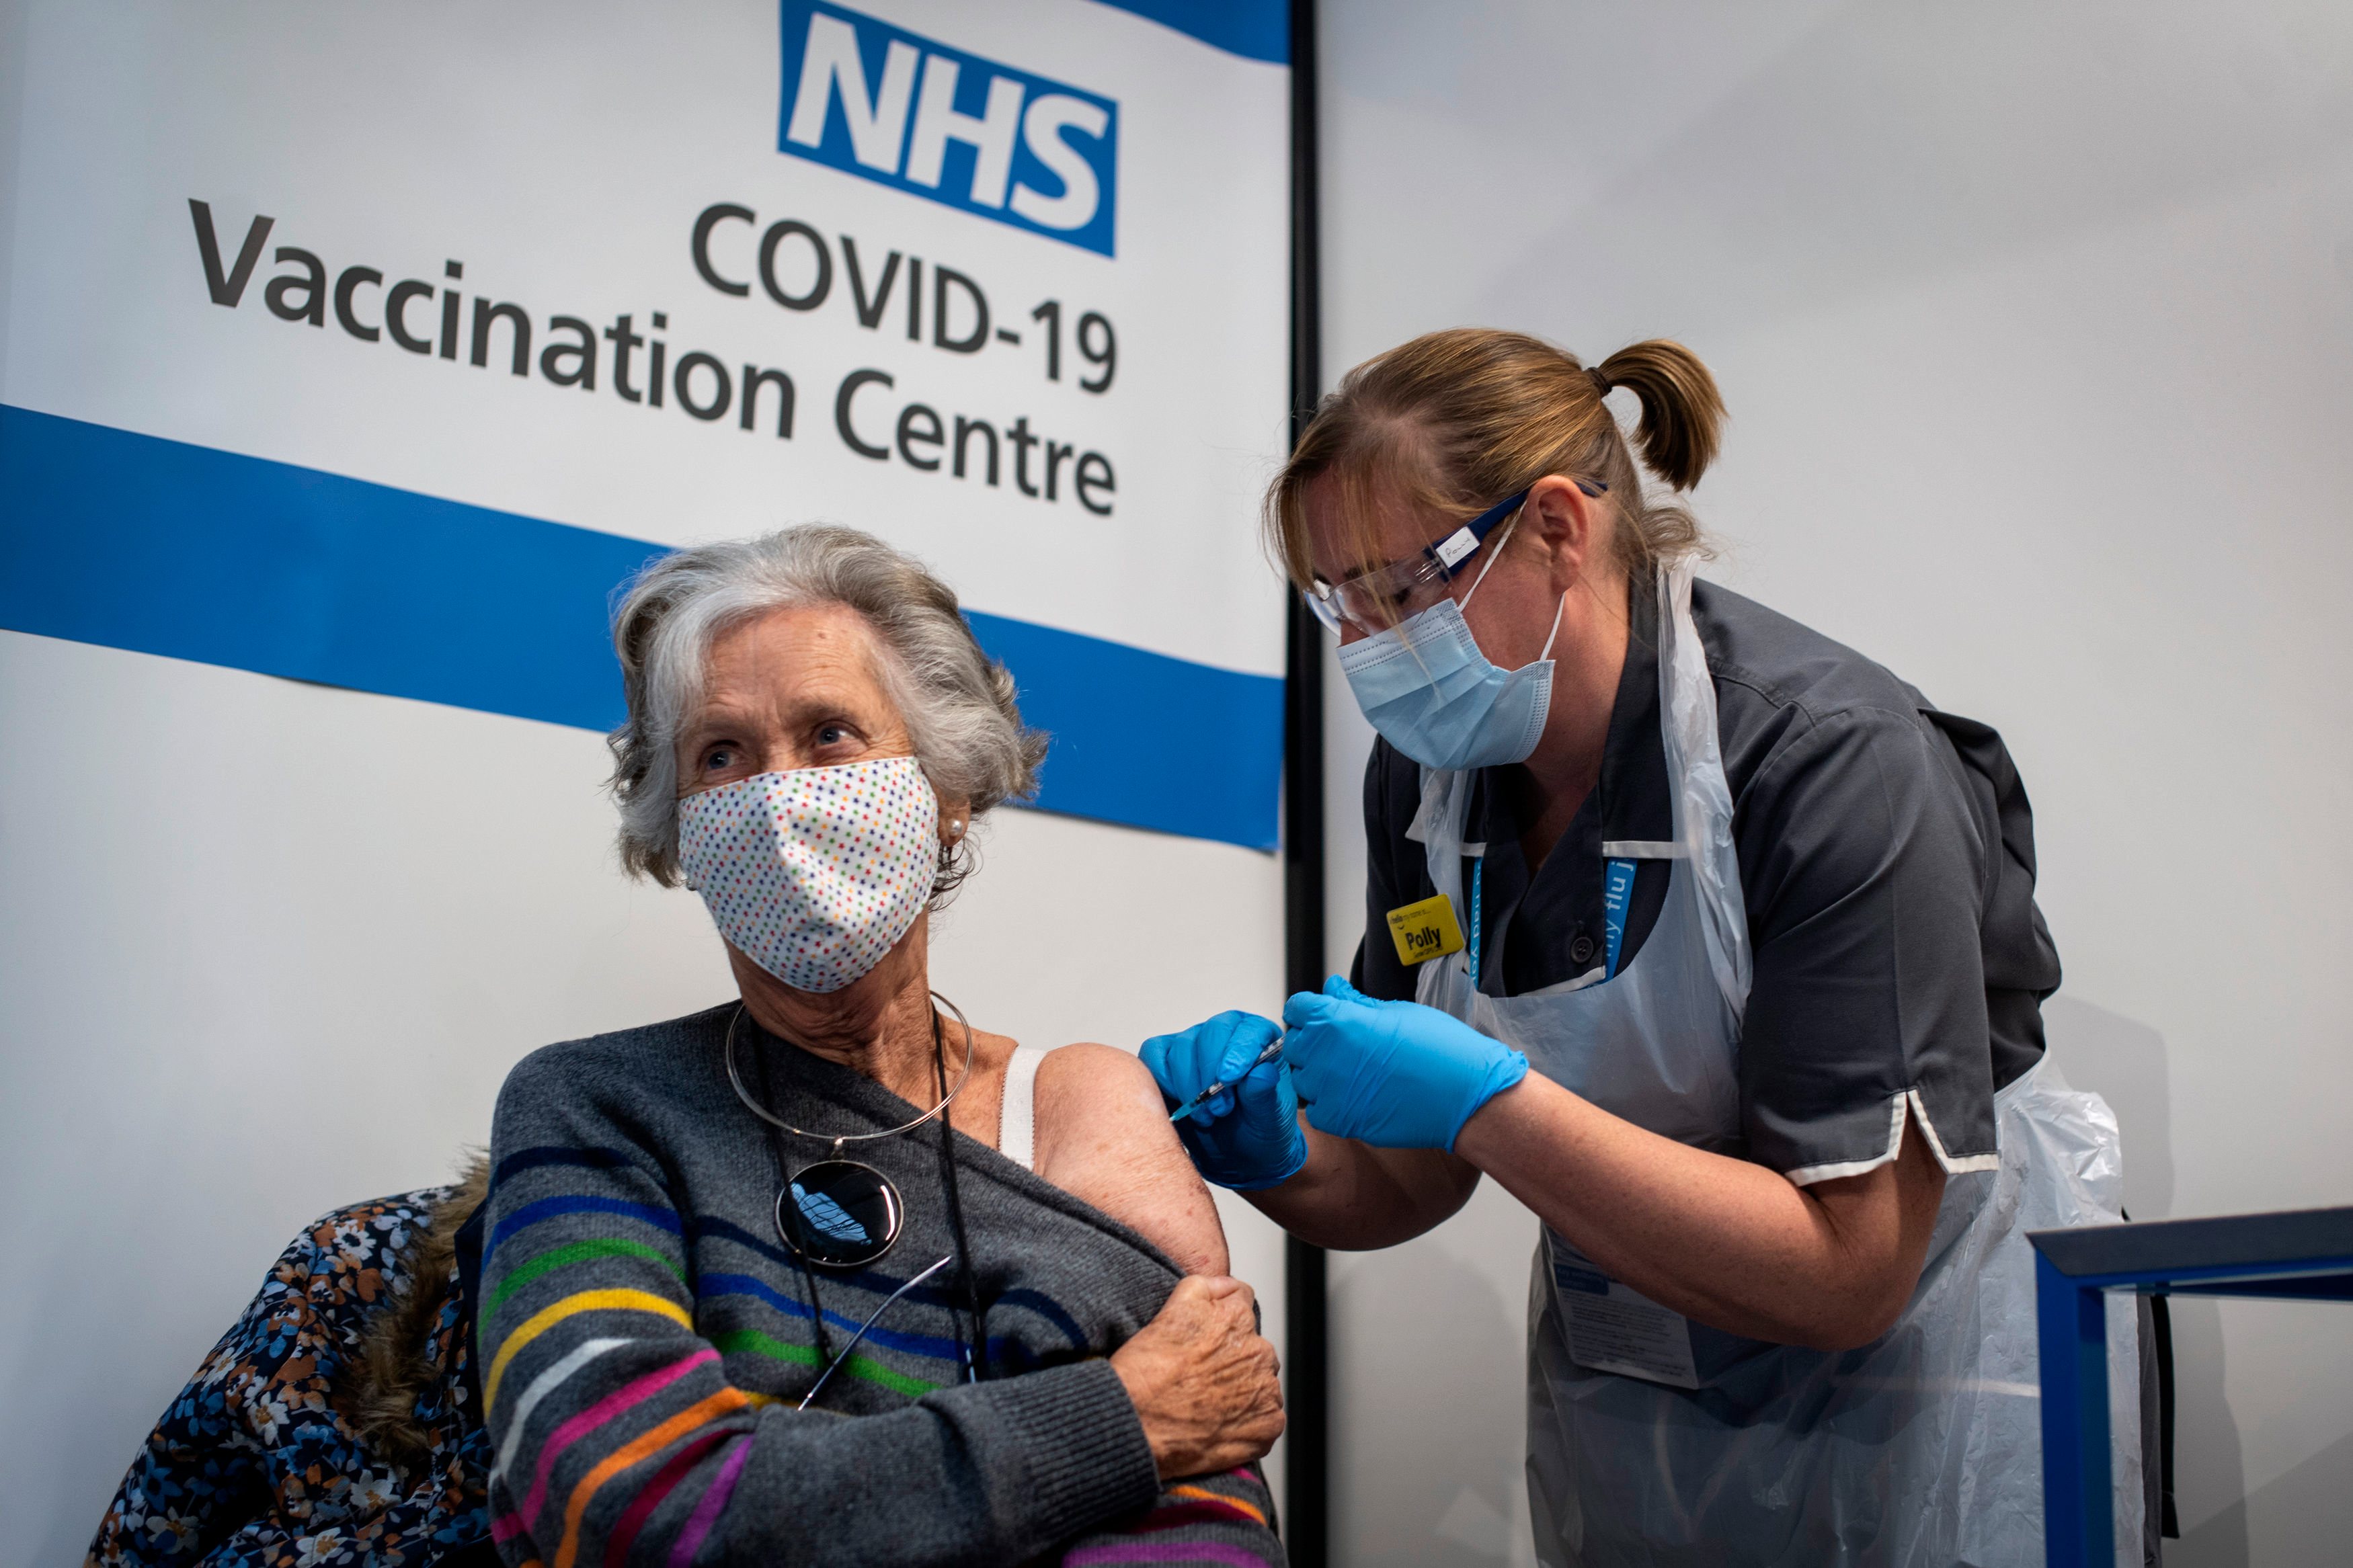 NHS England Starts Covid-19 Vaccination Campaign